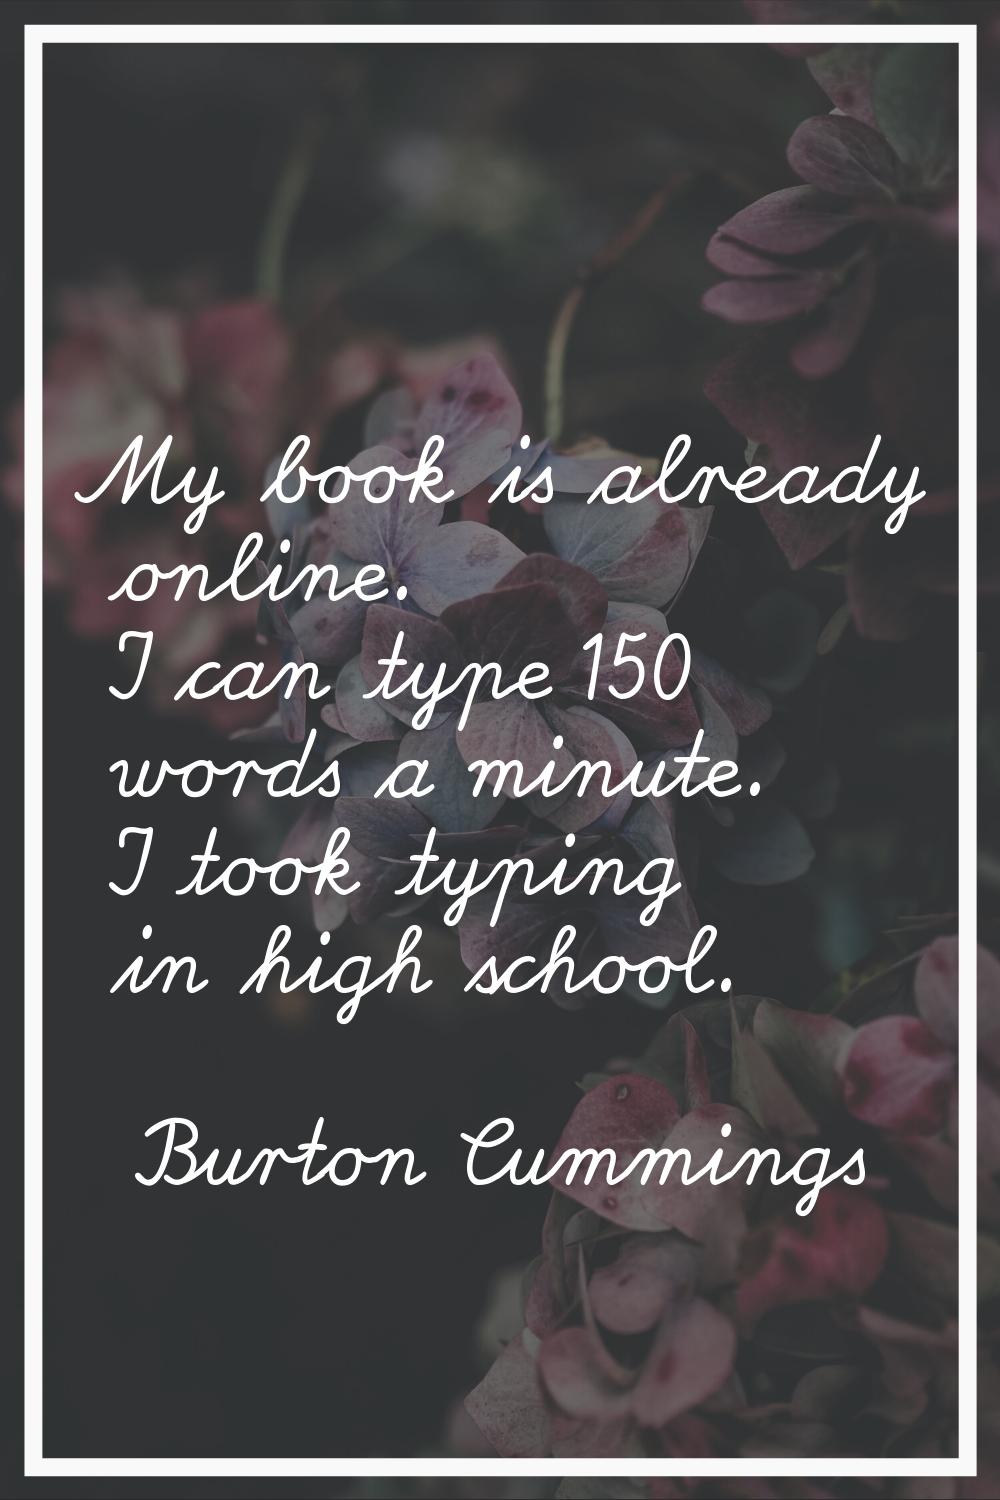 My book is already online. I can type 150 words a minute. I took typing in high school.